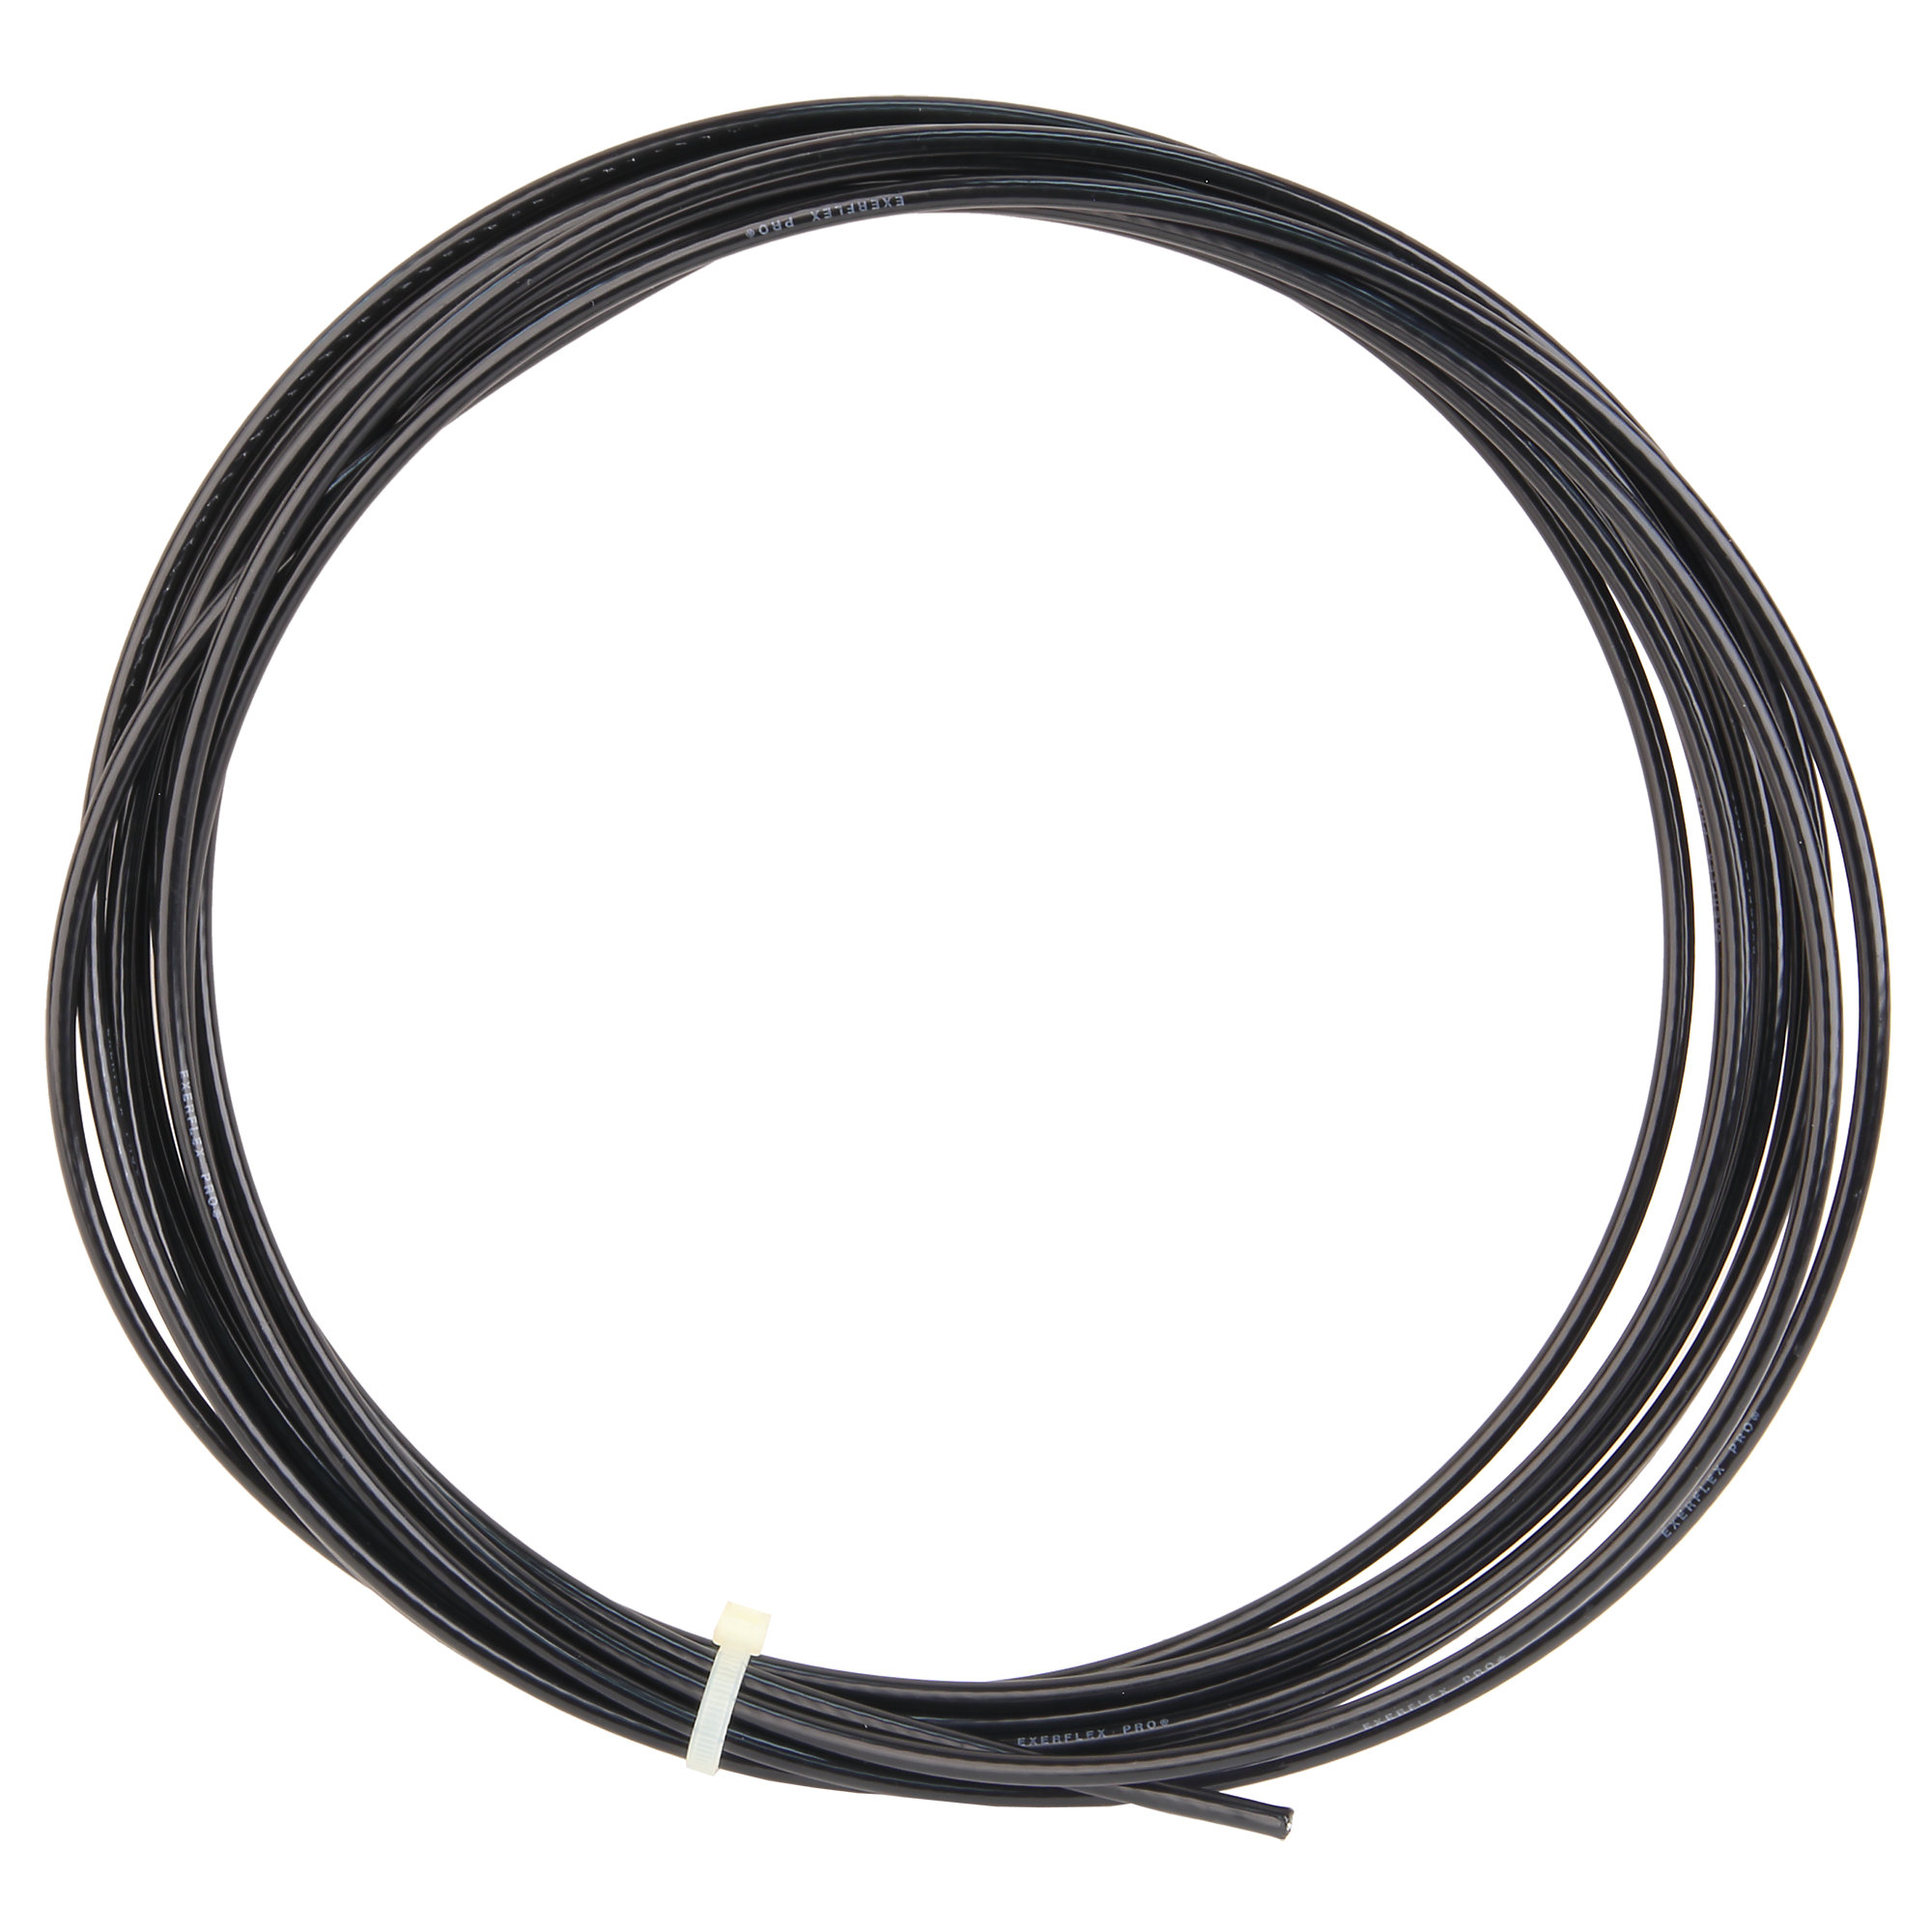 Exerflex Pro Cable 3/16", Black Nylon Coating, By the Foot 